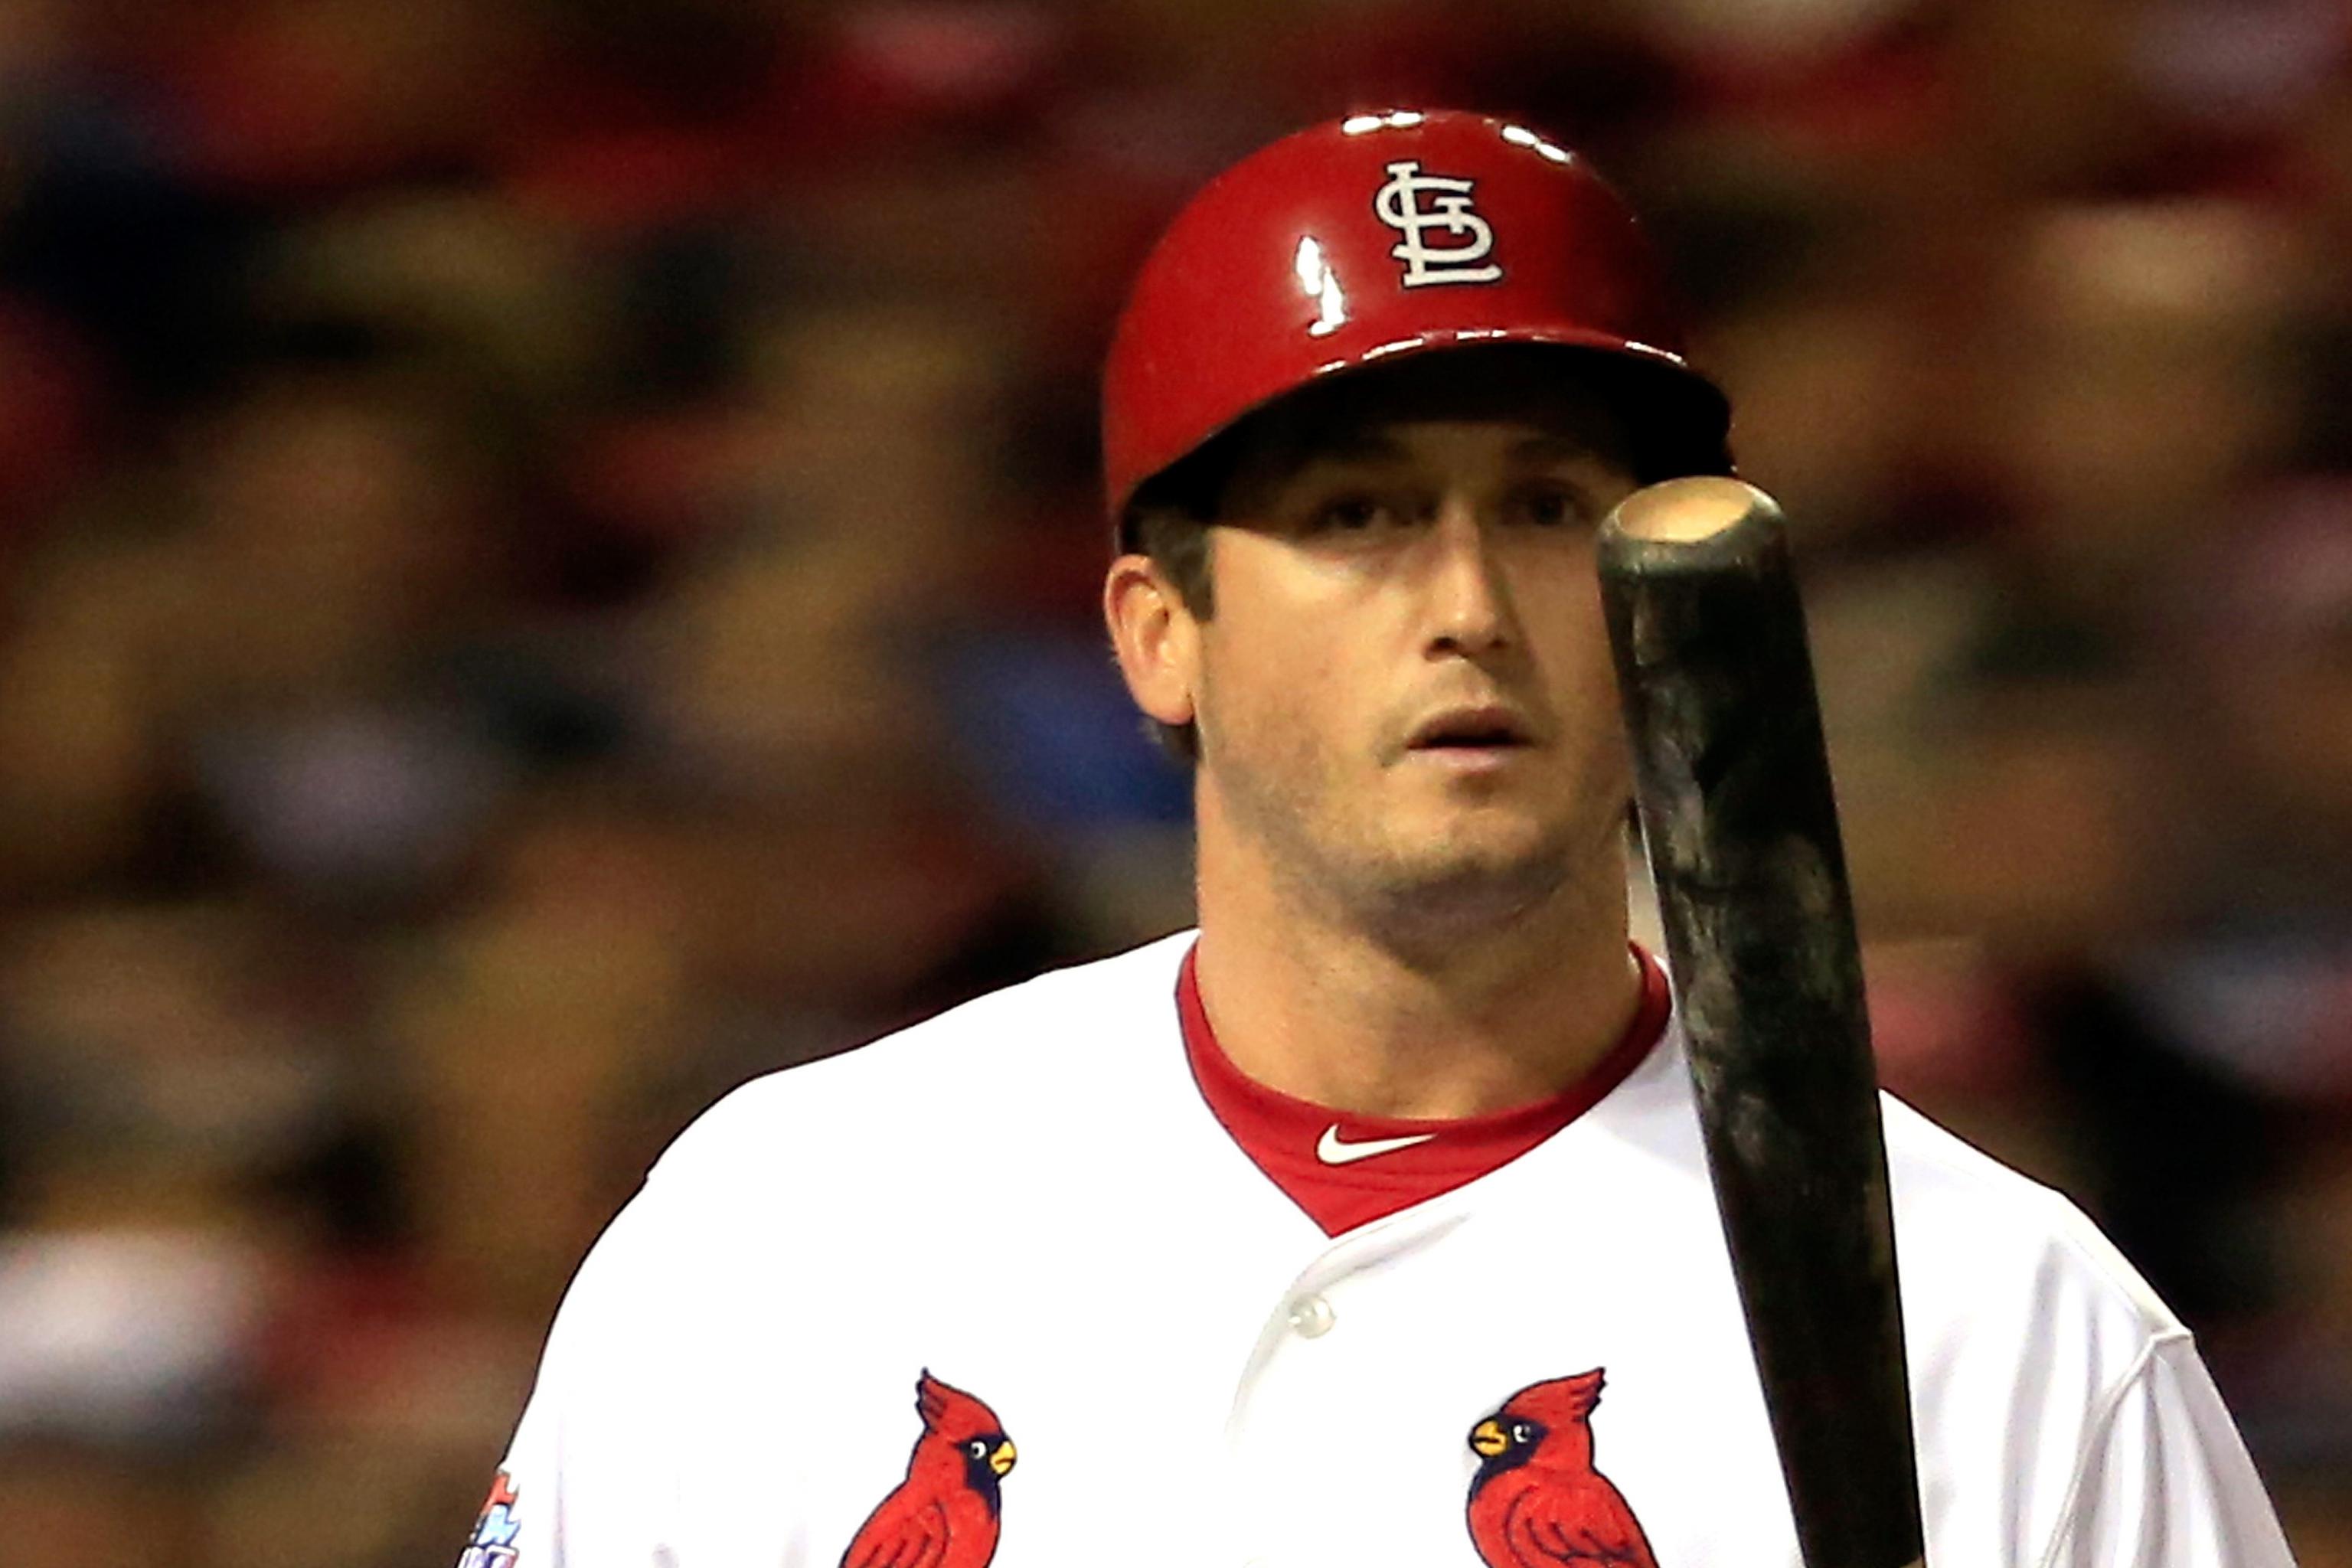 David Freese declines induction into the St. Louis Cardinals' Hall of Fame  – KGET 17